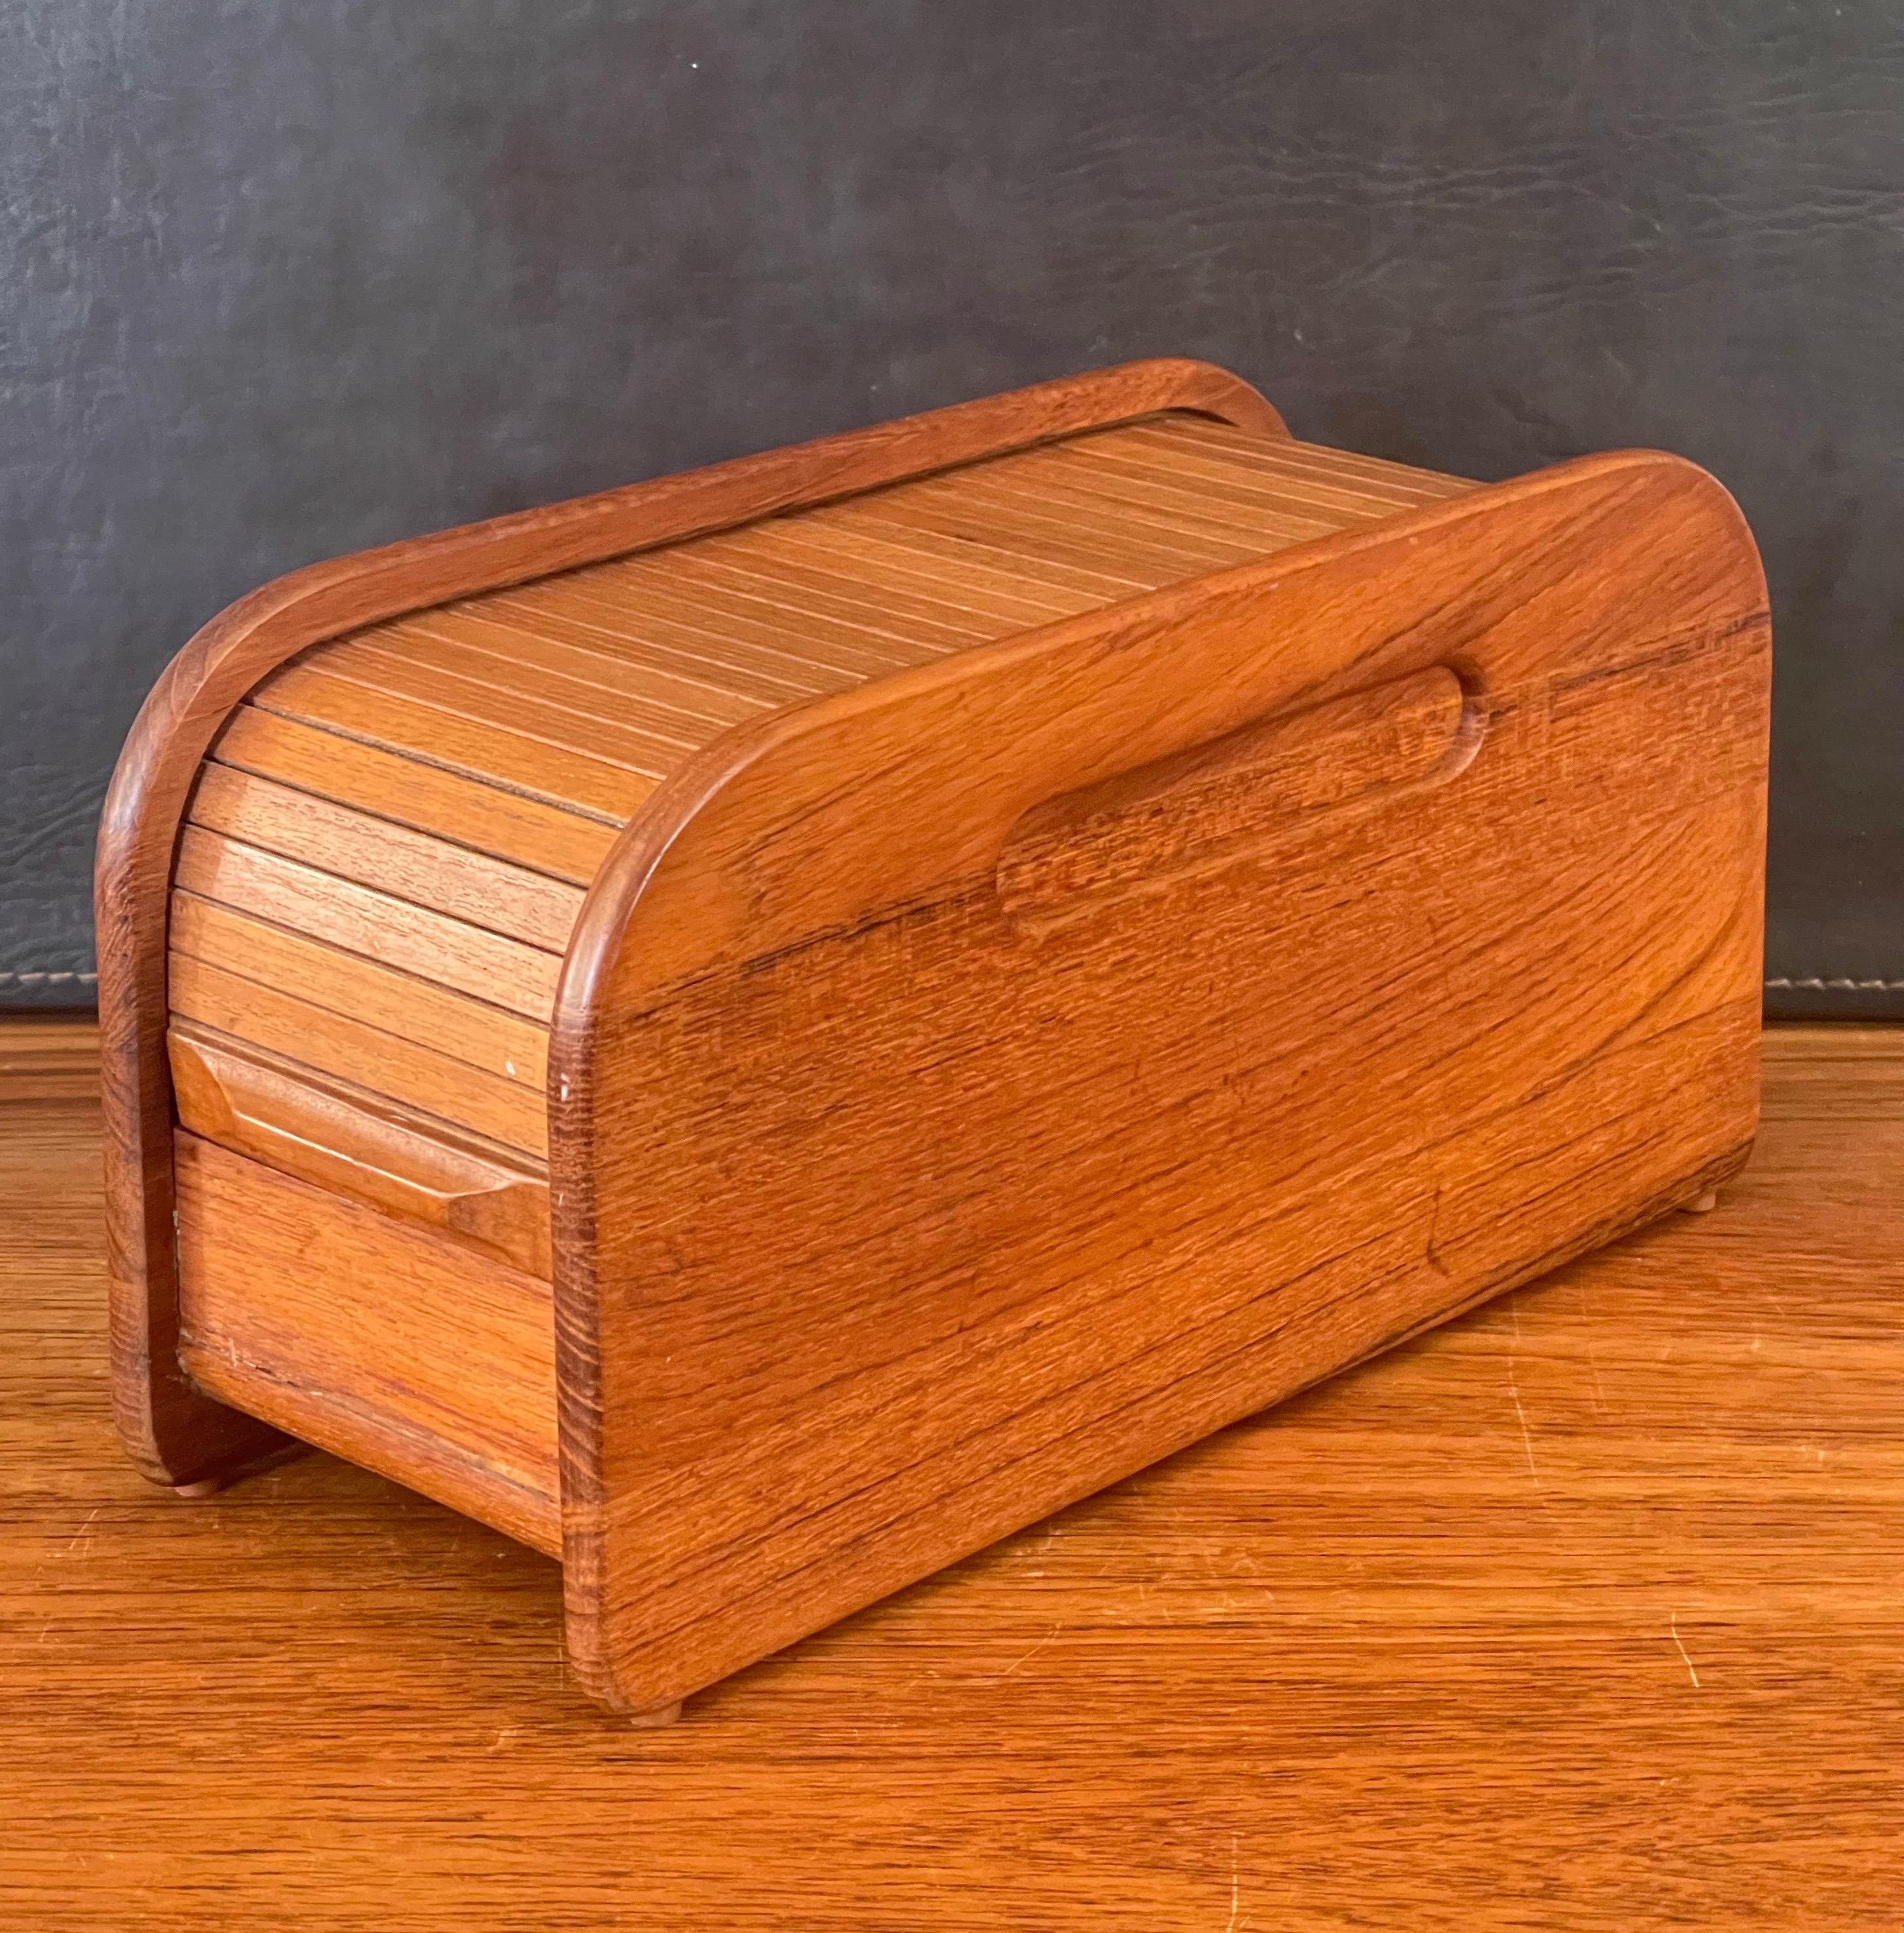 Small Danish modern solid teak tambour door trinket box, circa 1970s. This beautiful well crafted roll top desk box is great for trinkets or storage. The piece is in very good vintage condition and measures 4.75